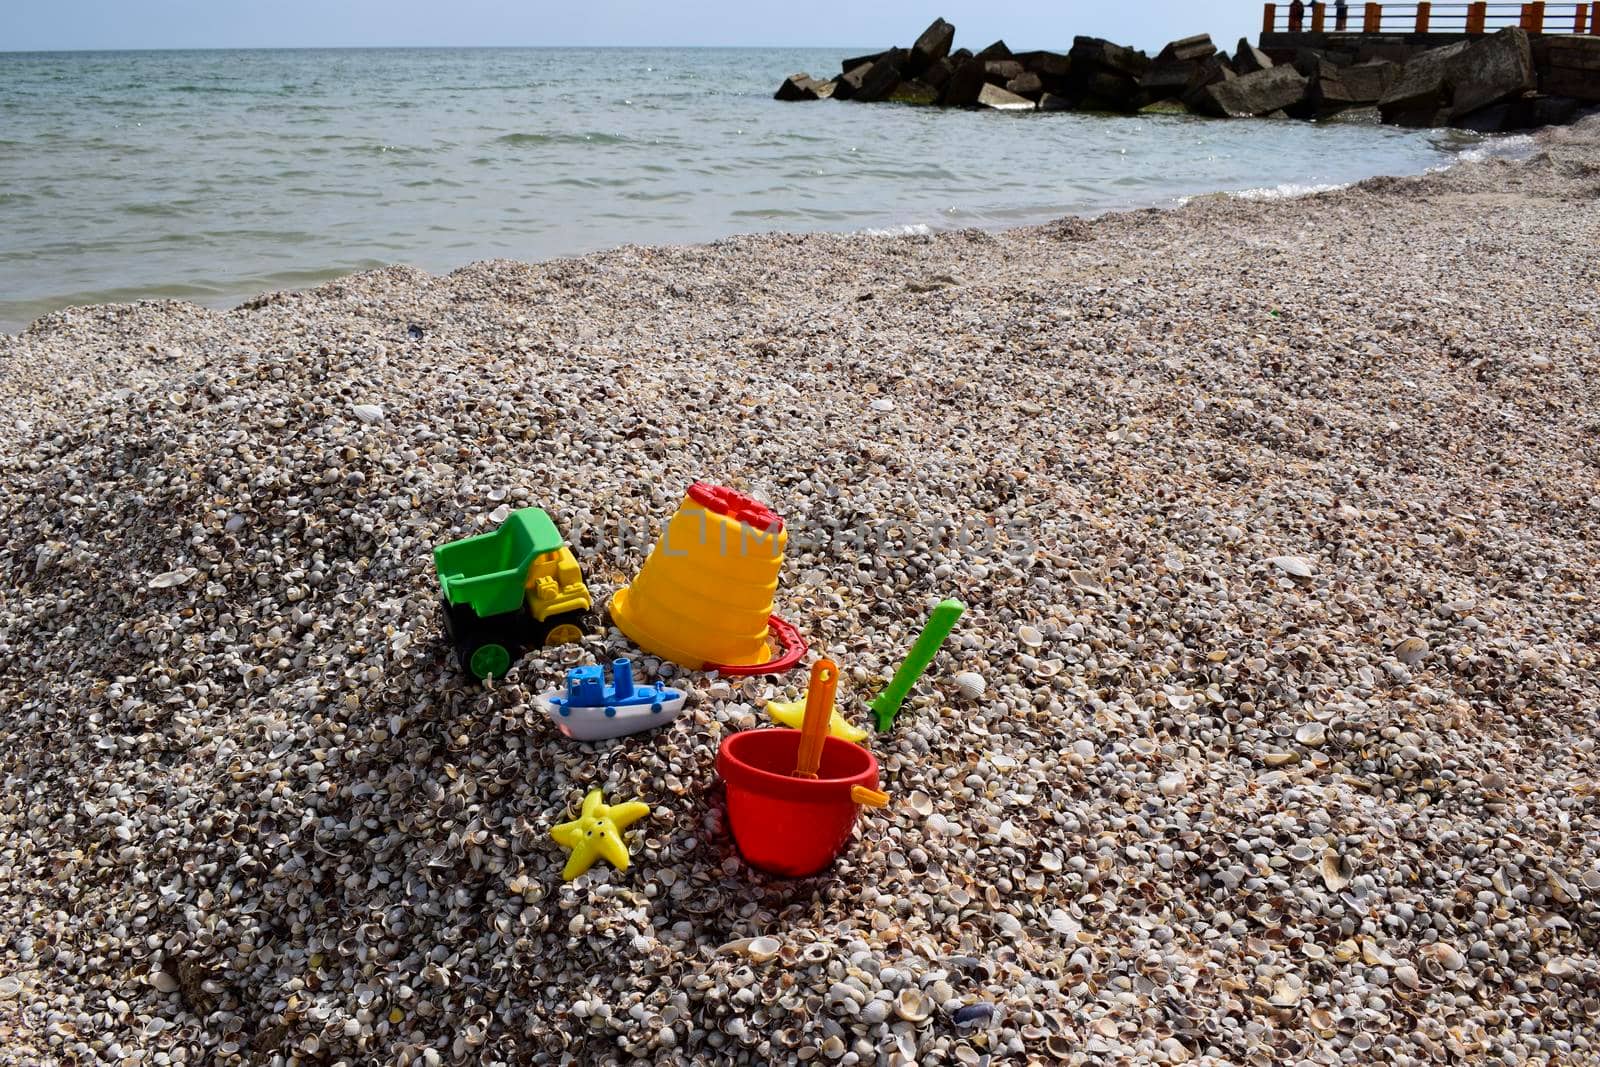 Child's bucket, spade and other toys on tropical beach against sea and blue sky.